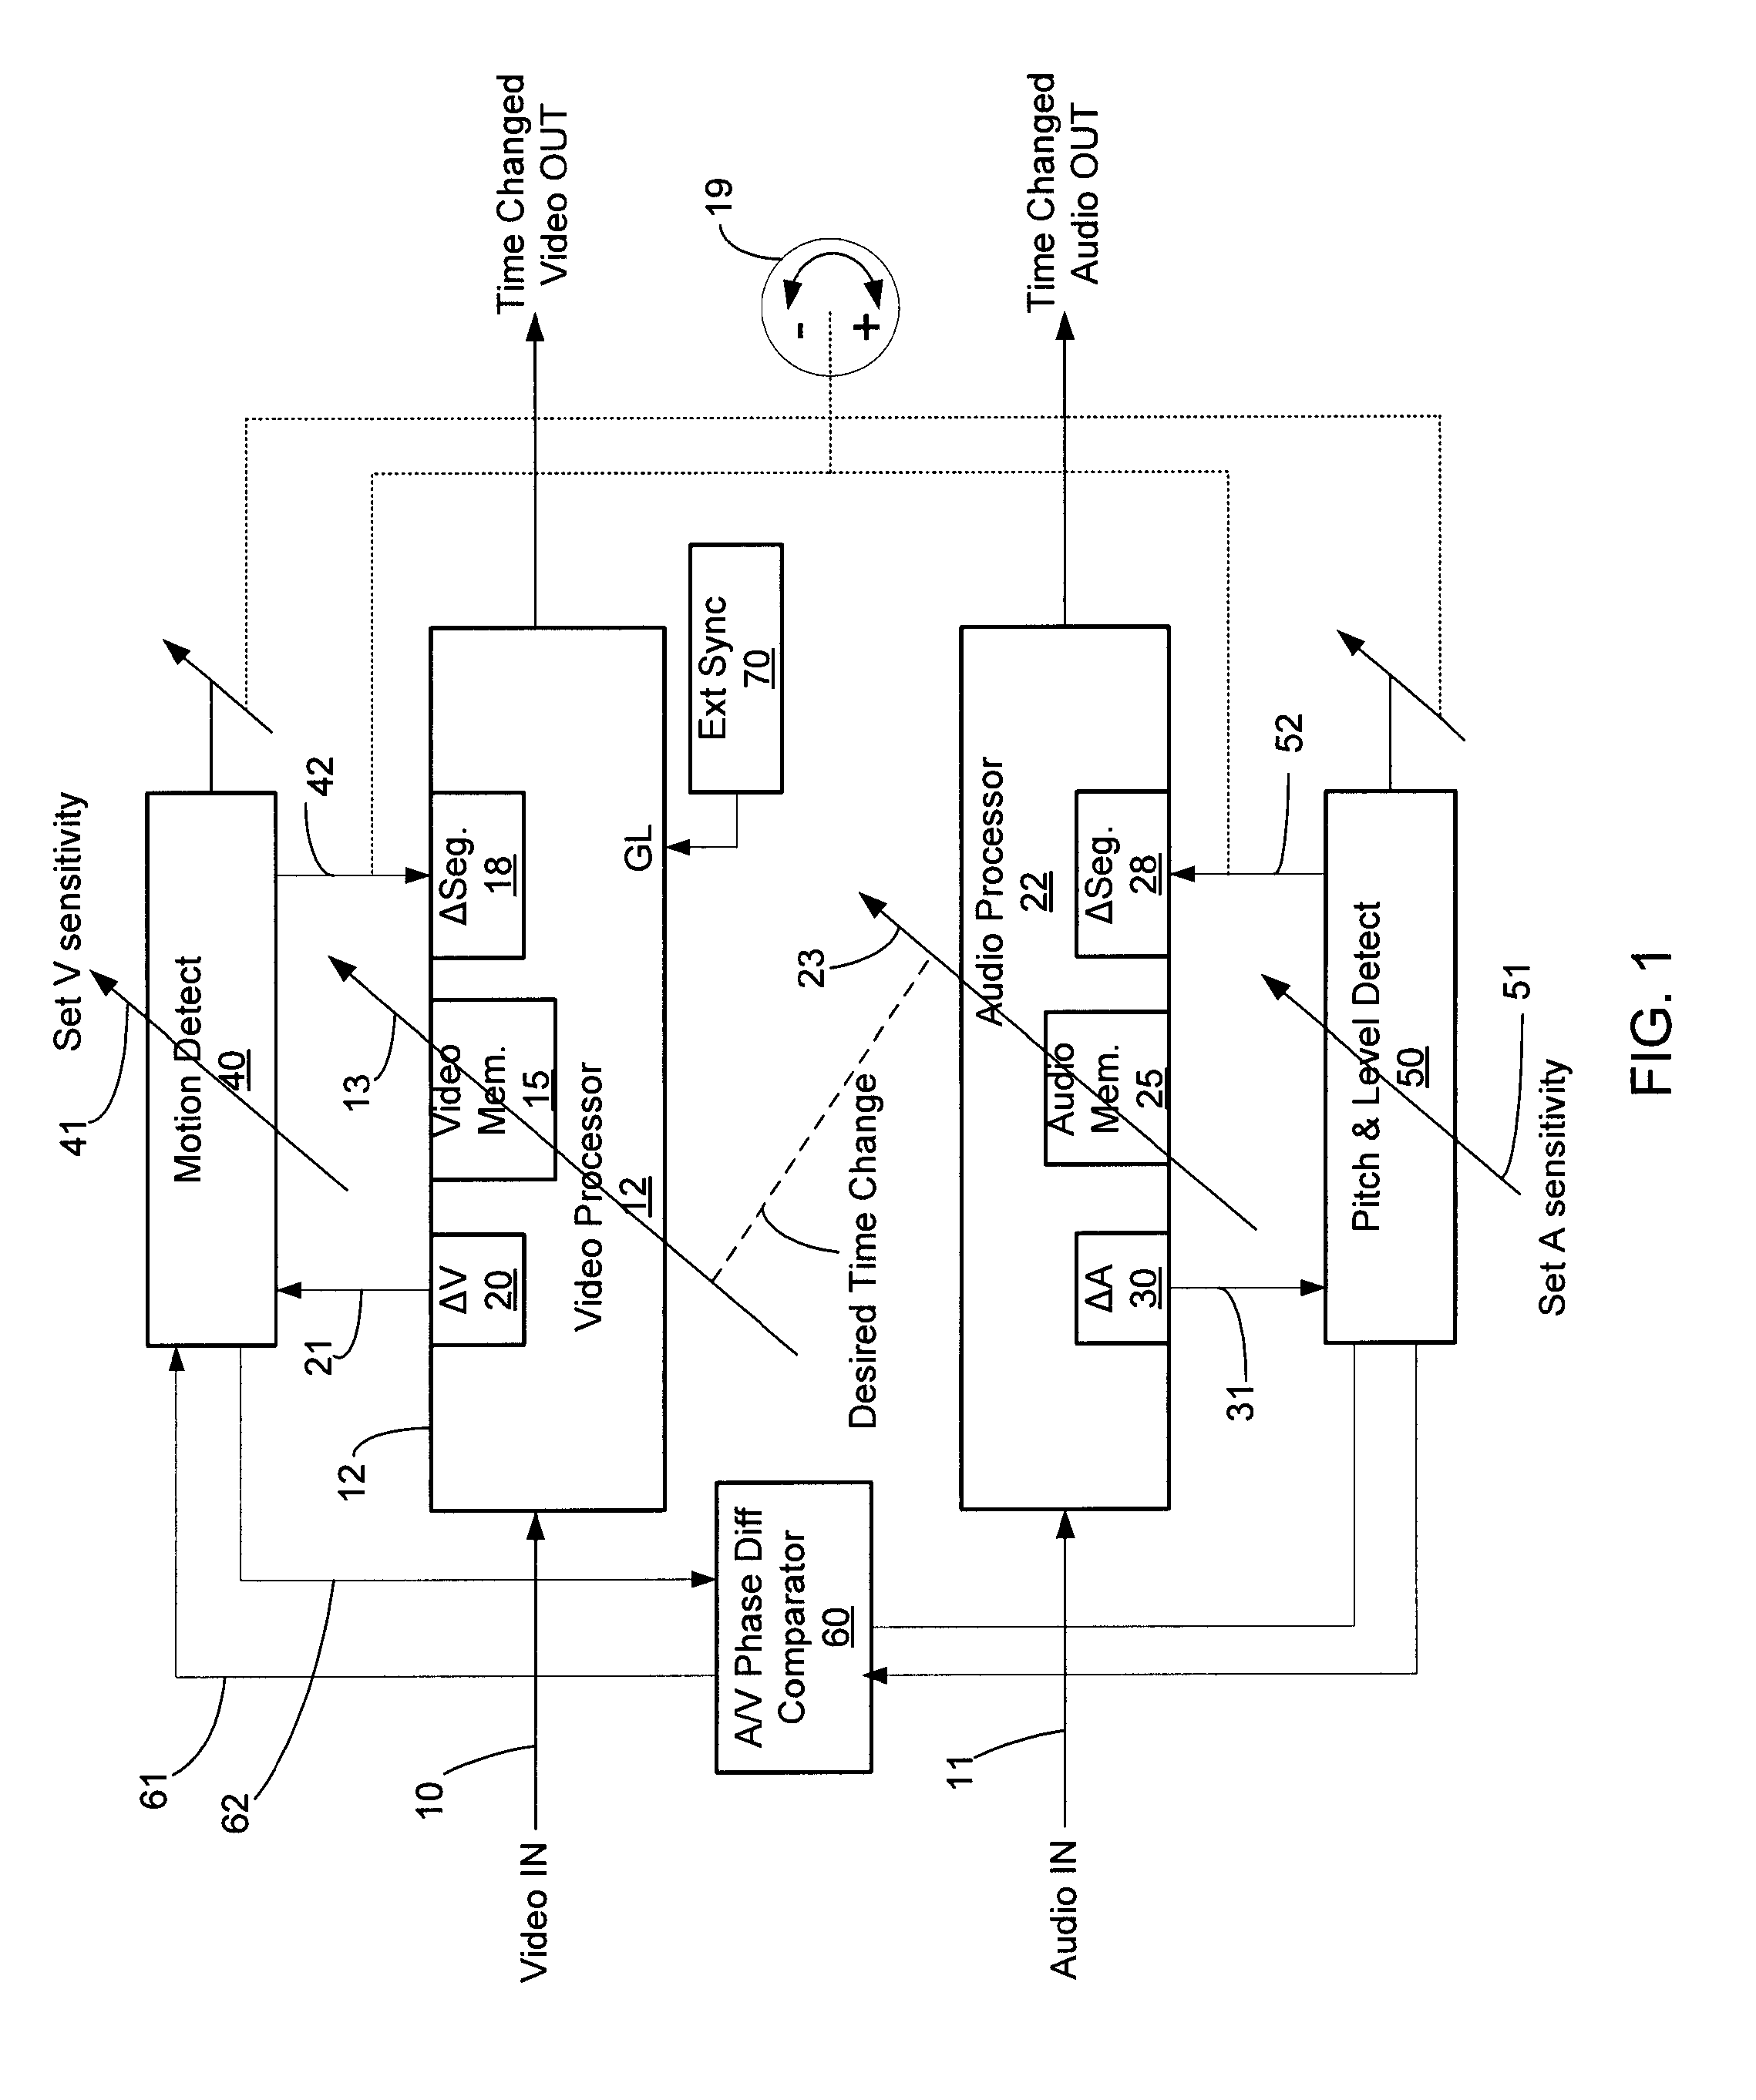 System and method for removing a pause in a delayed remote broadcast interview